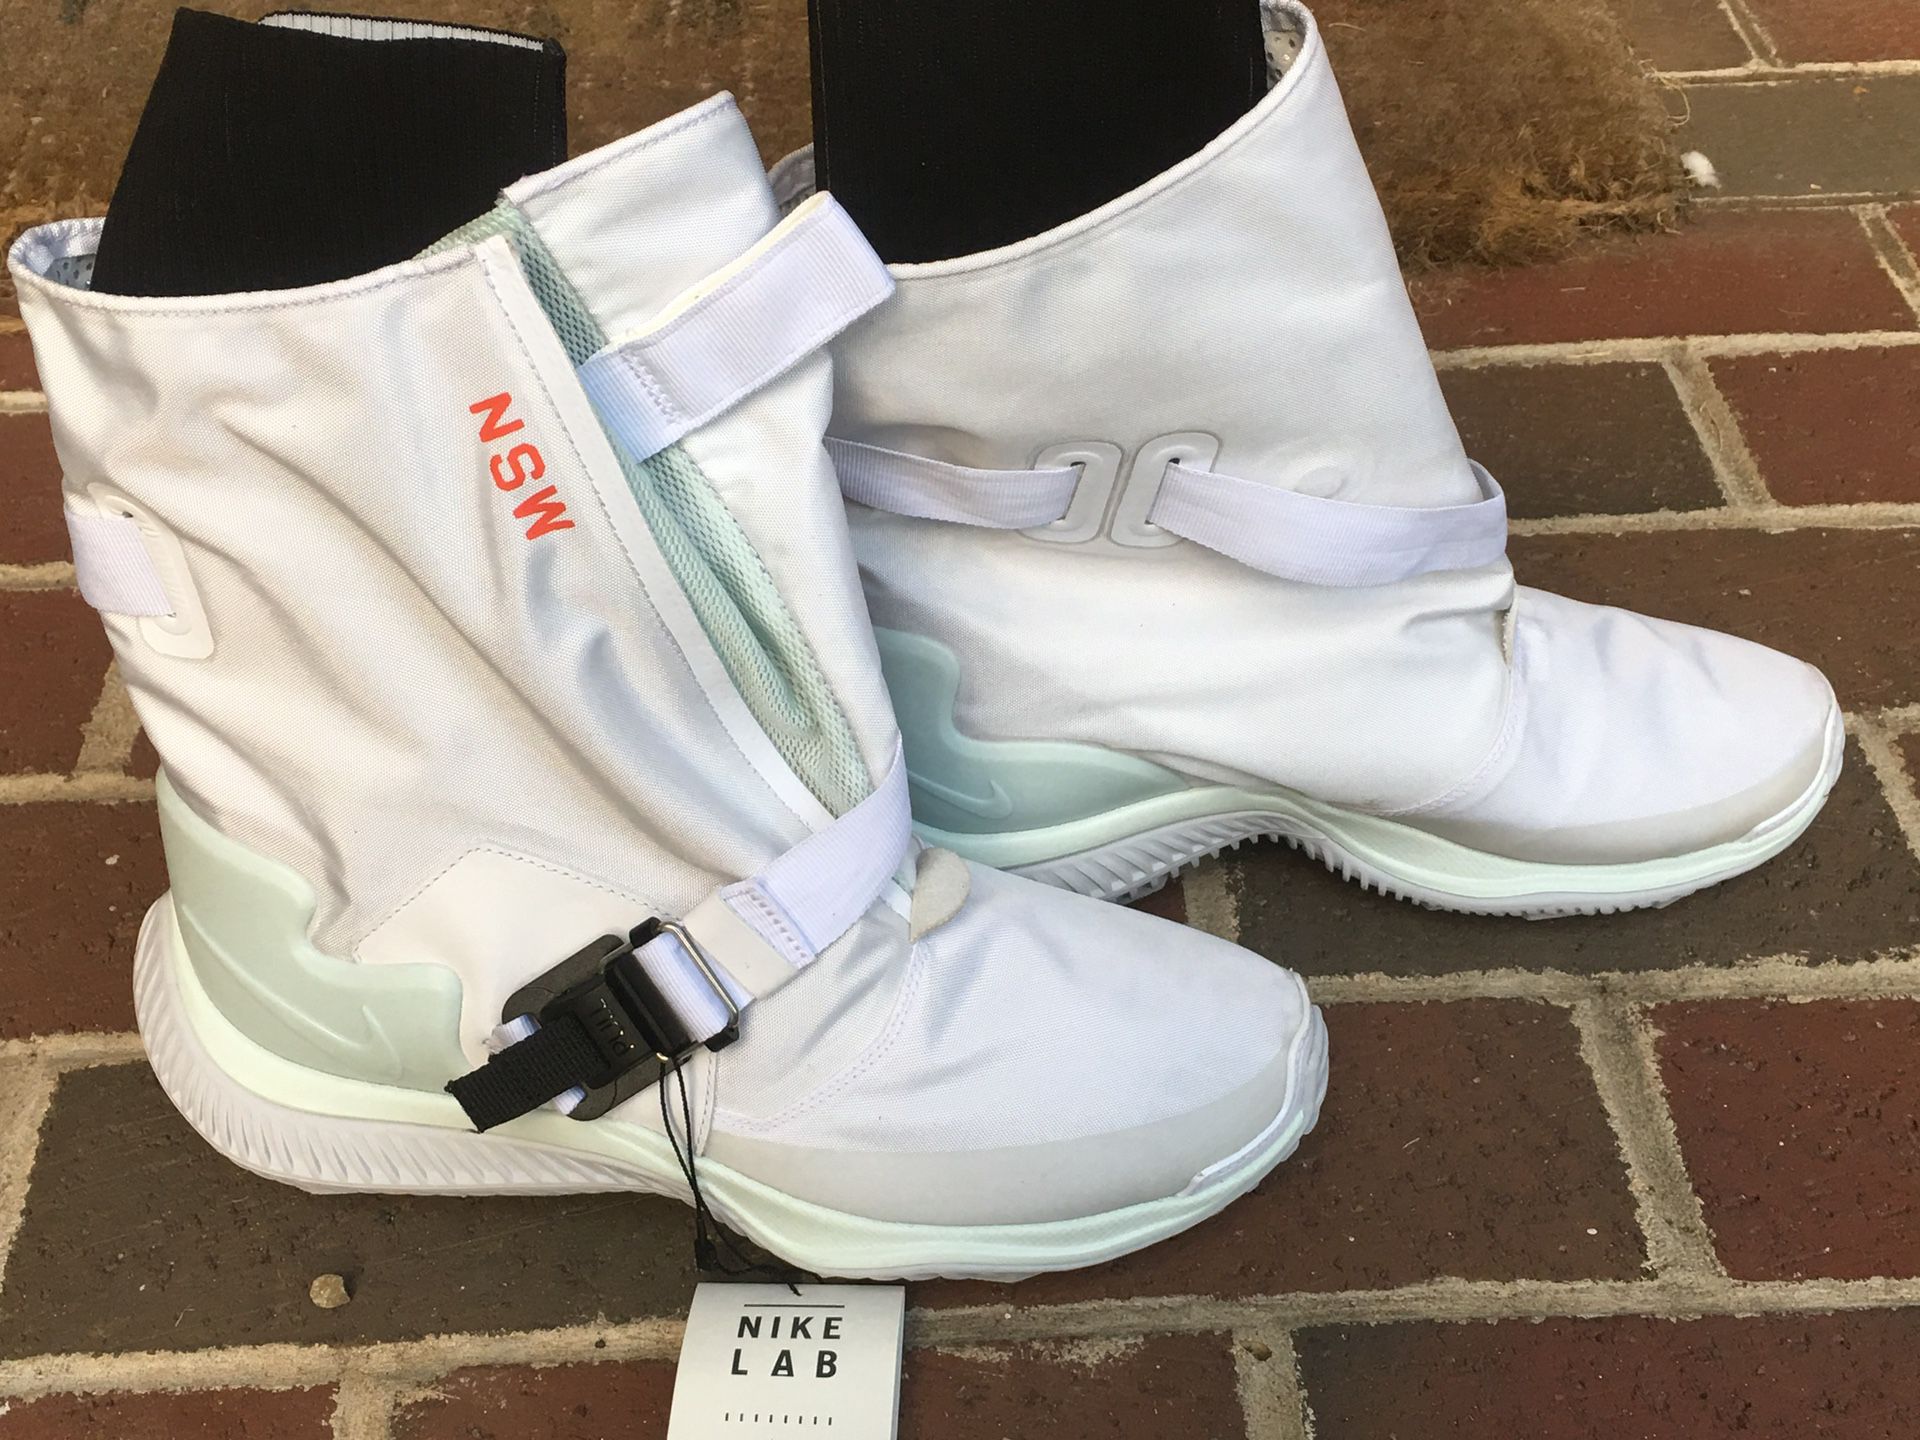 New! Ladies Nike Gaiter sky boots white ( new with tags) $250 retail